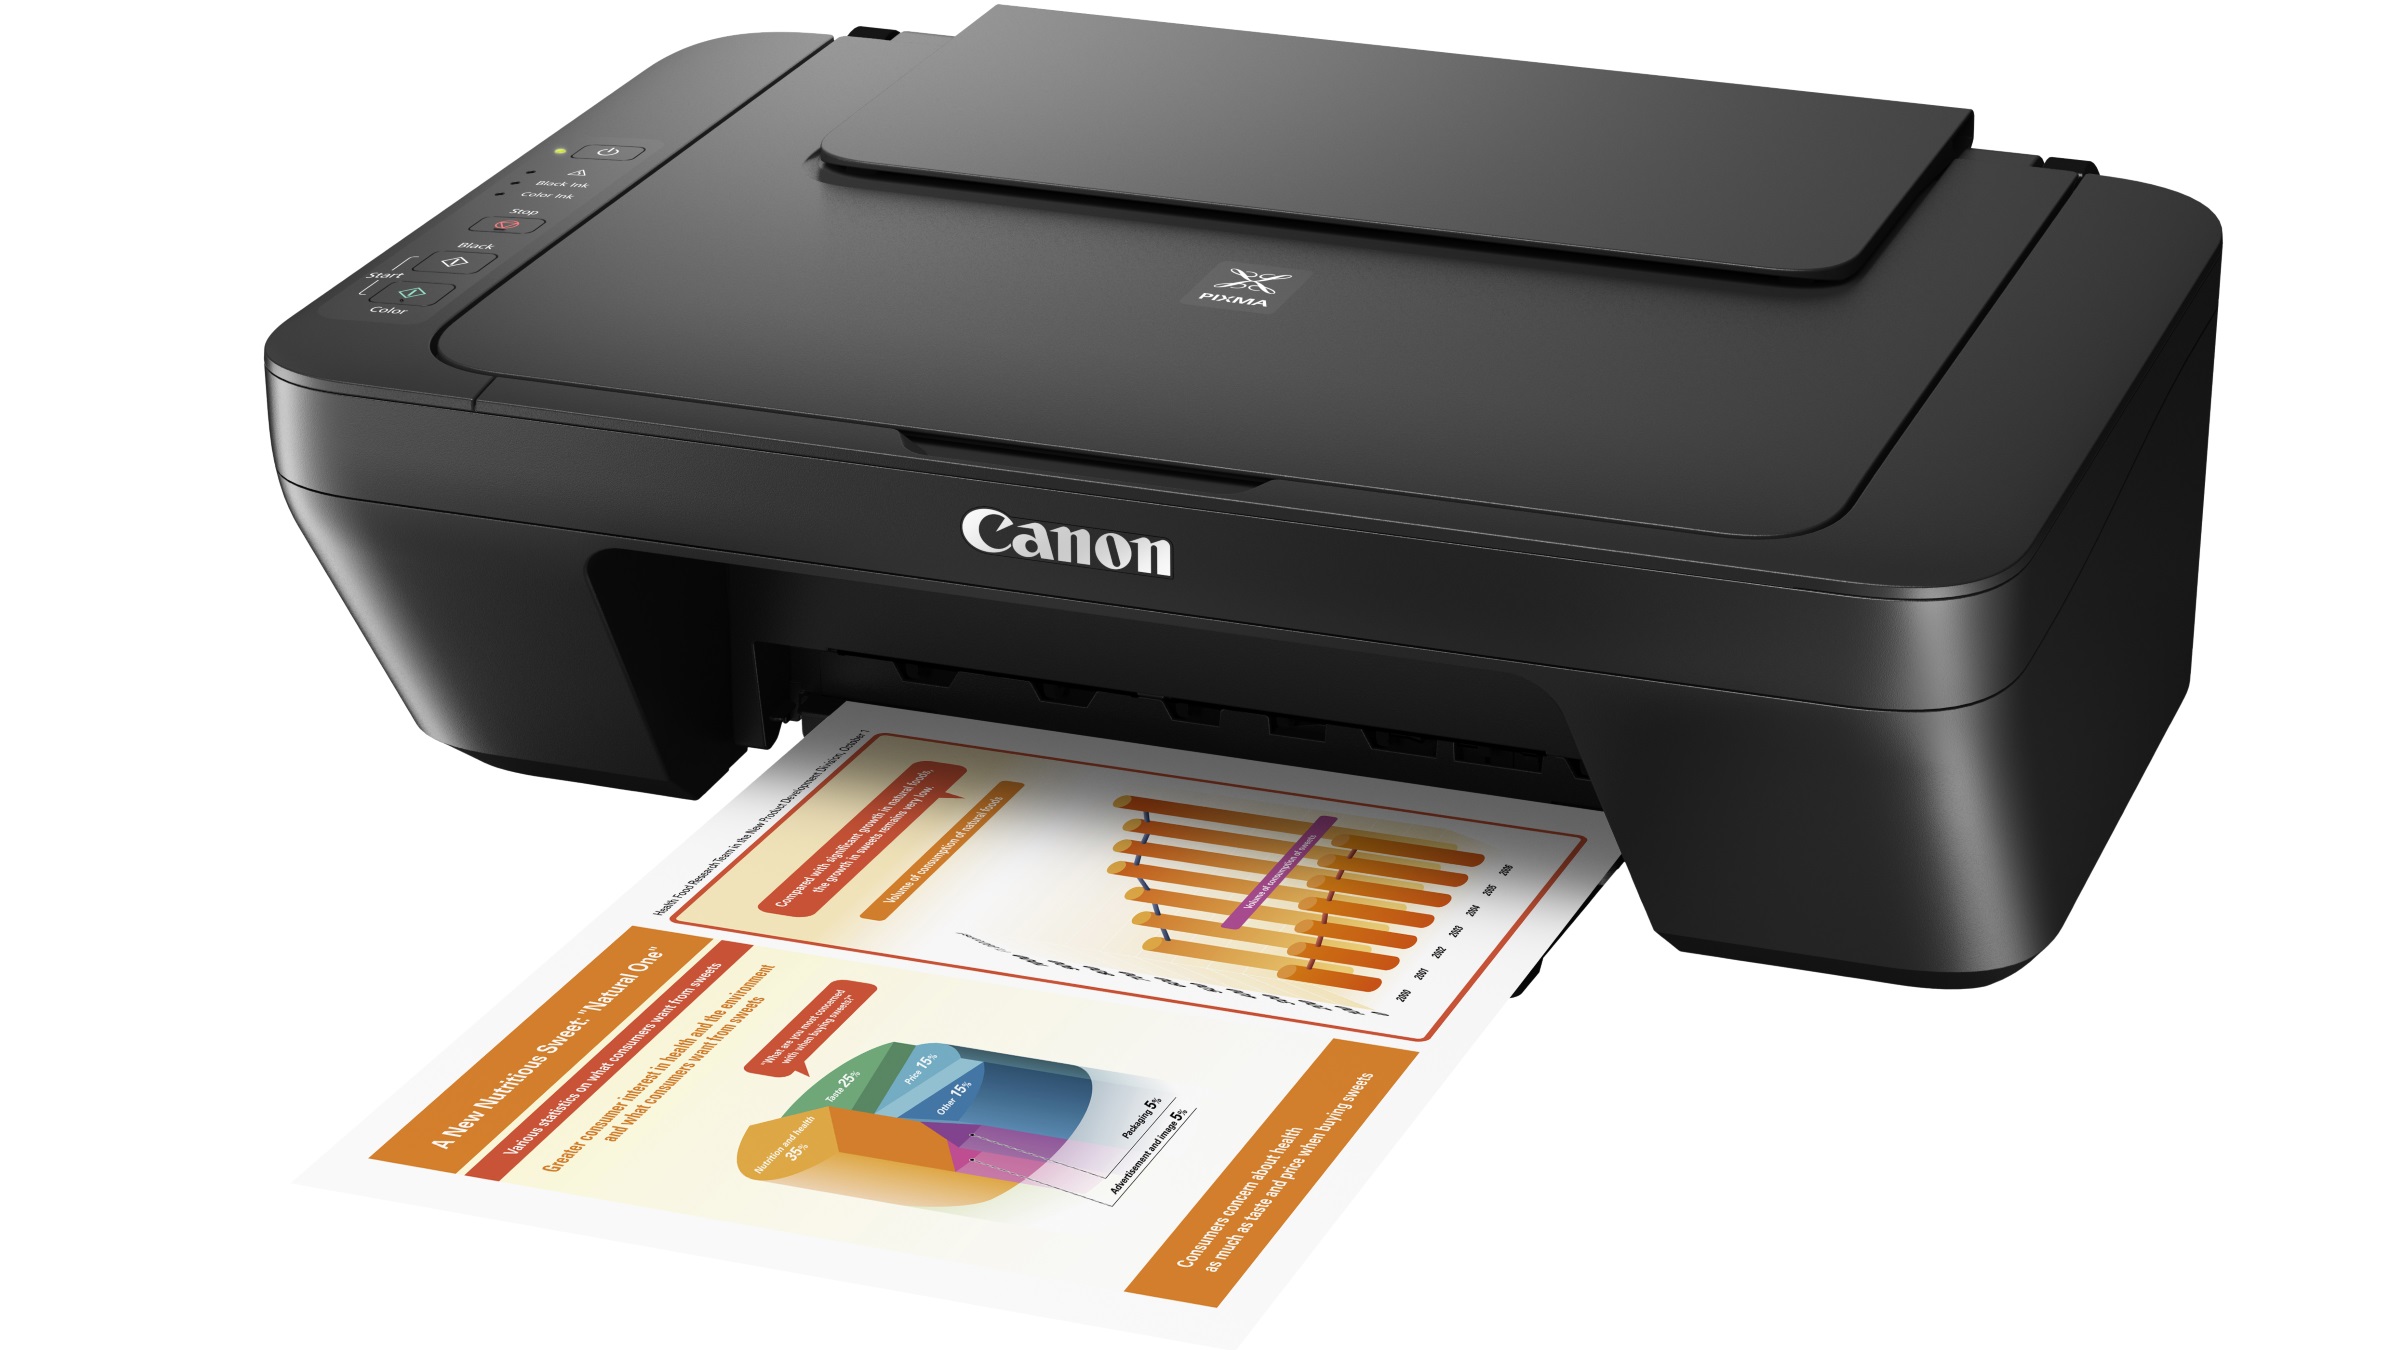 canon mp470 printer scanning for pdf